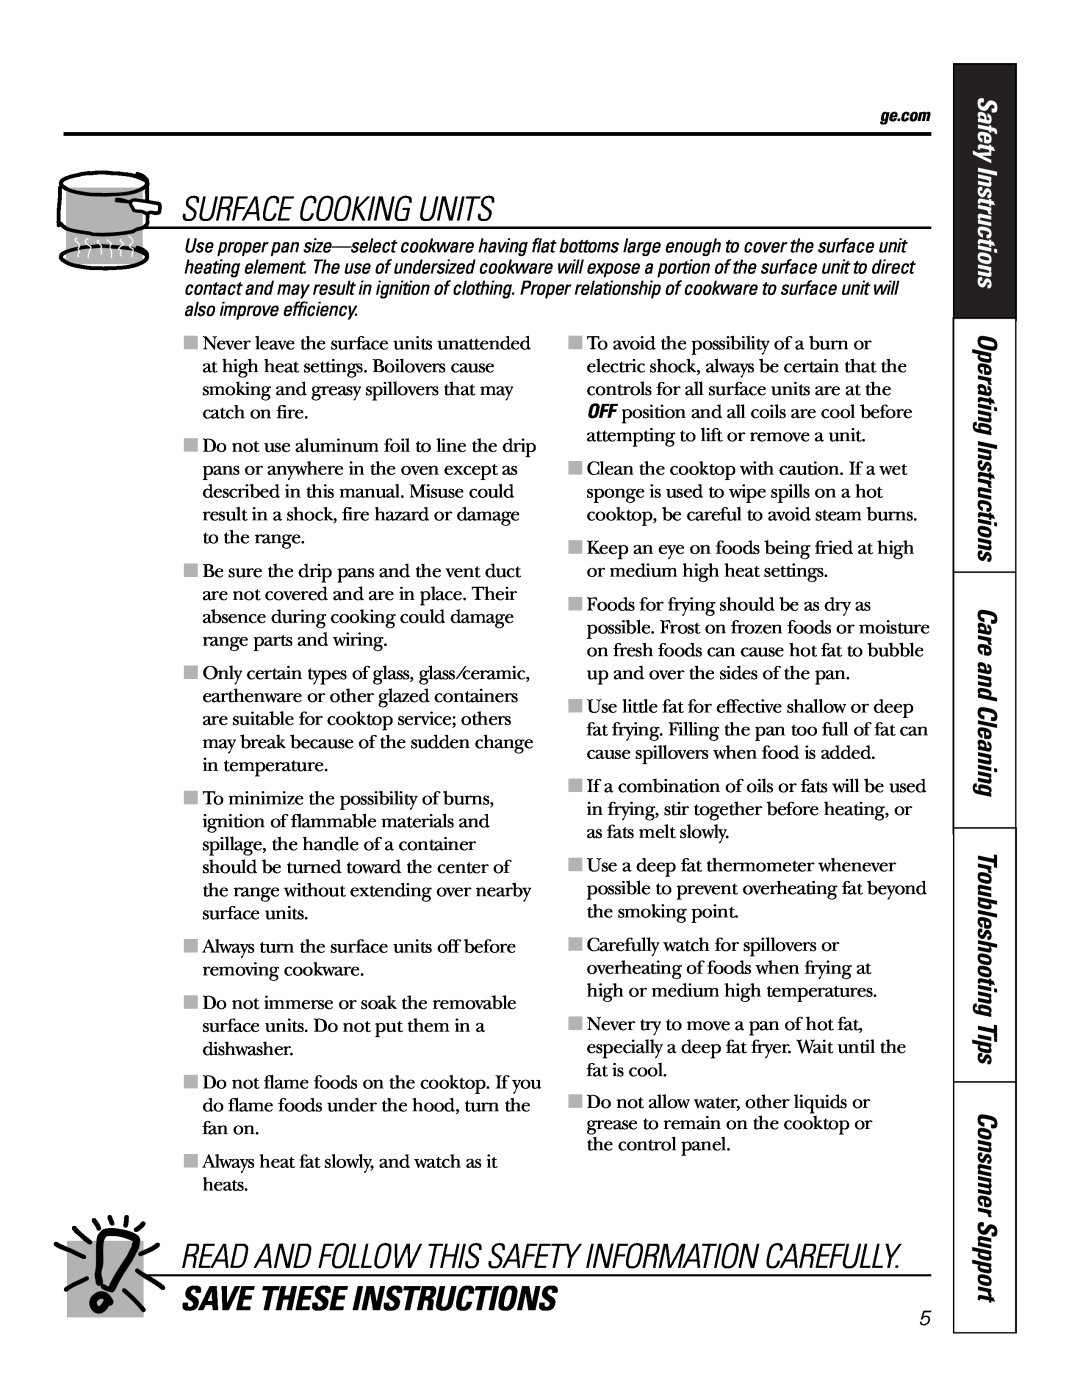 GE JMS08 owner manual Surface Cooking Units, Save These Instructions, Support, Safety Instructions 